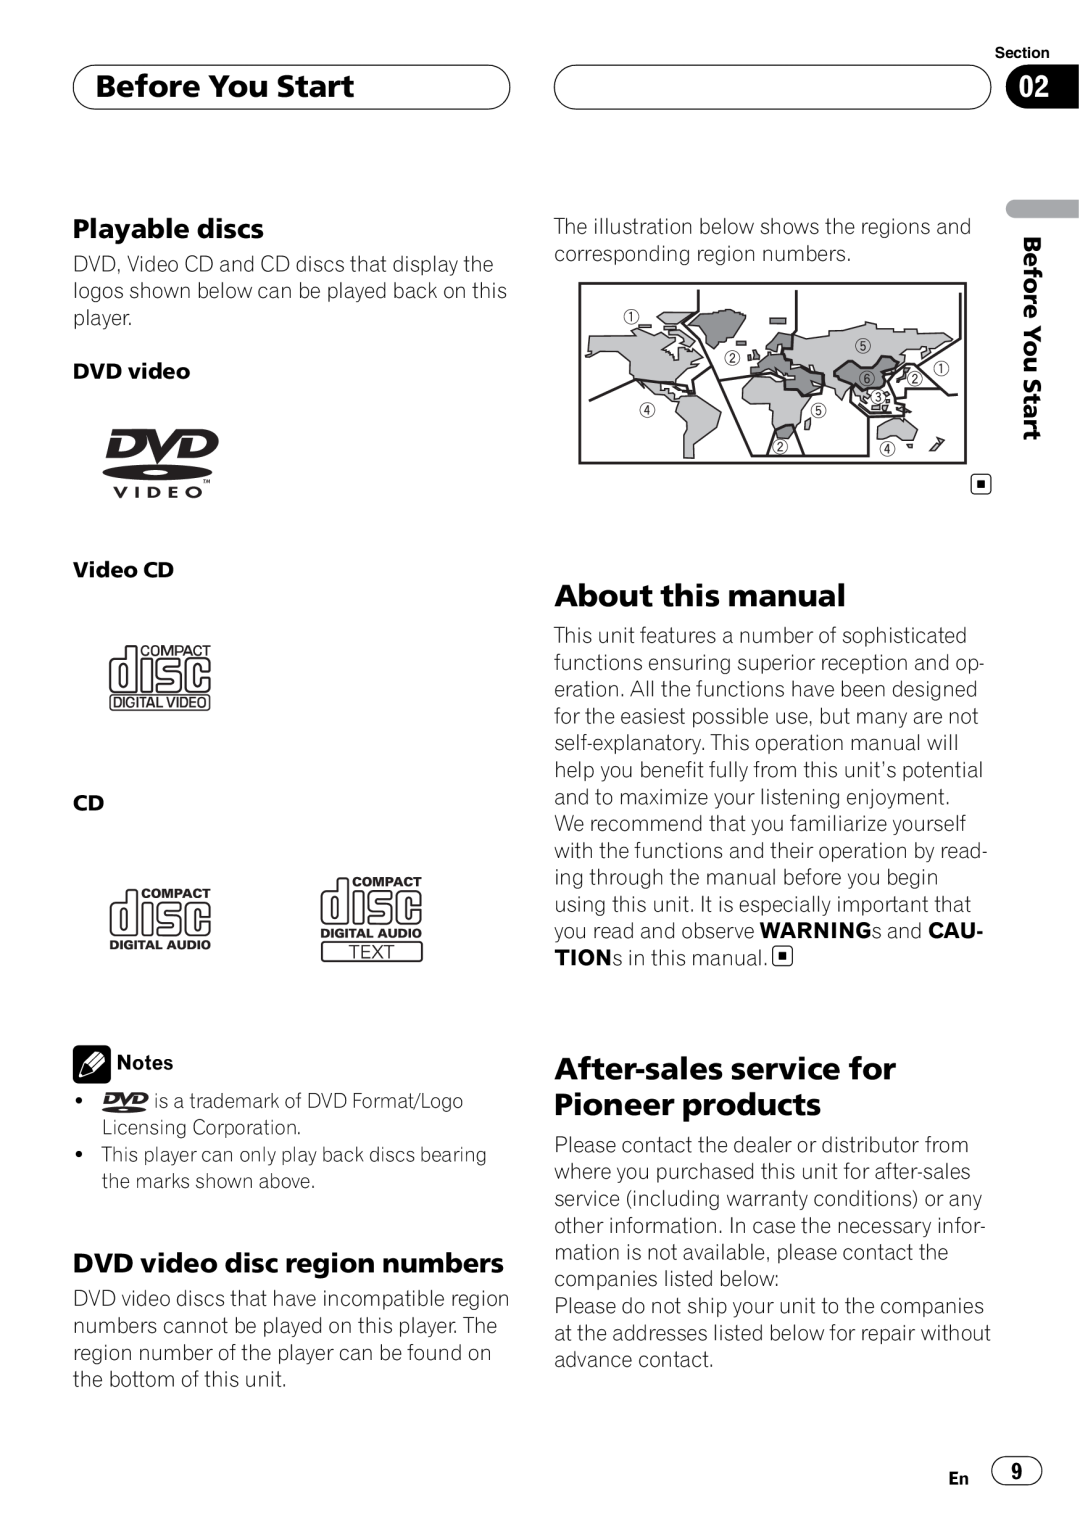 Pioneer AVH-P6000DVD Before You Start, About this manual, After-salesservice for Pioneer products, Playable discs 